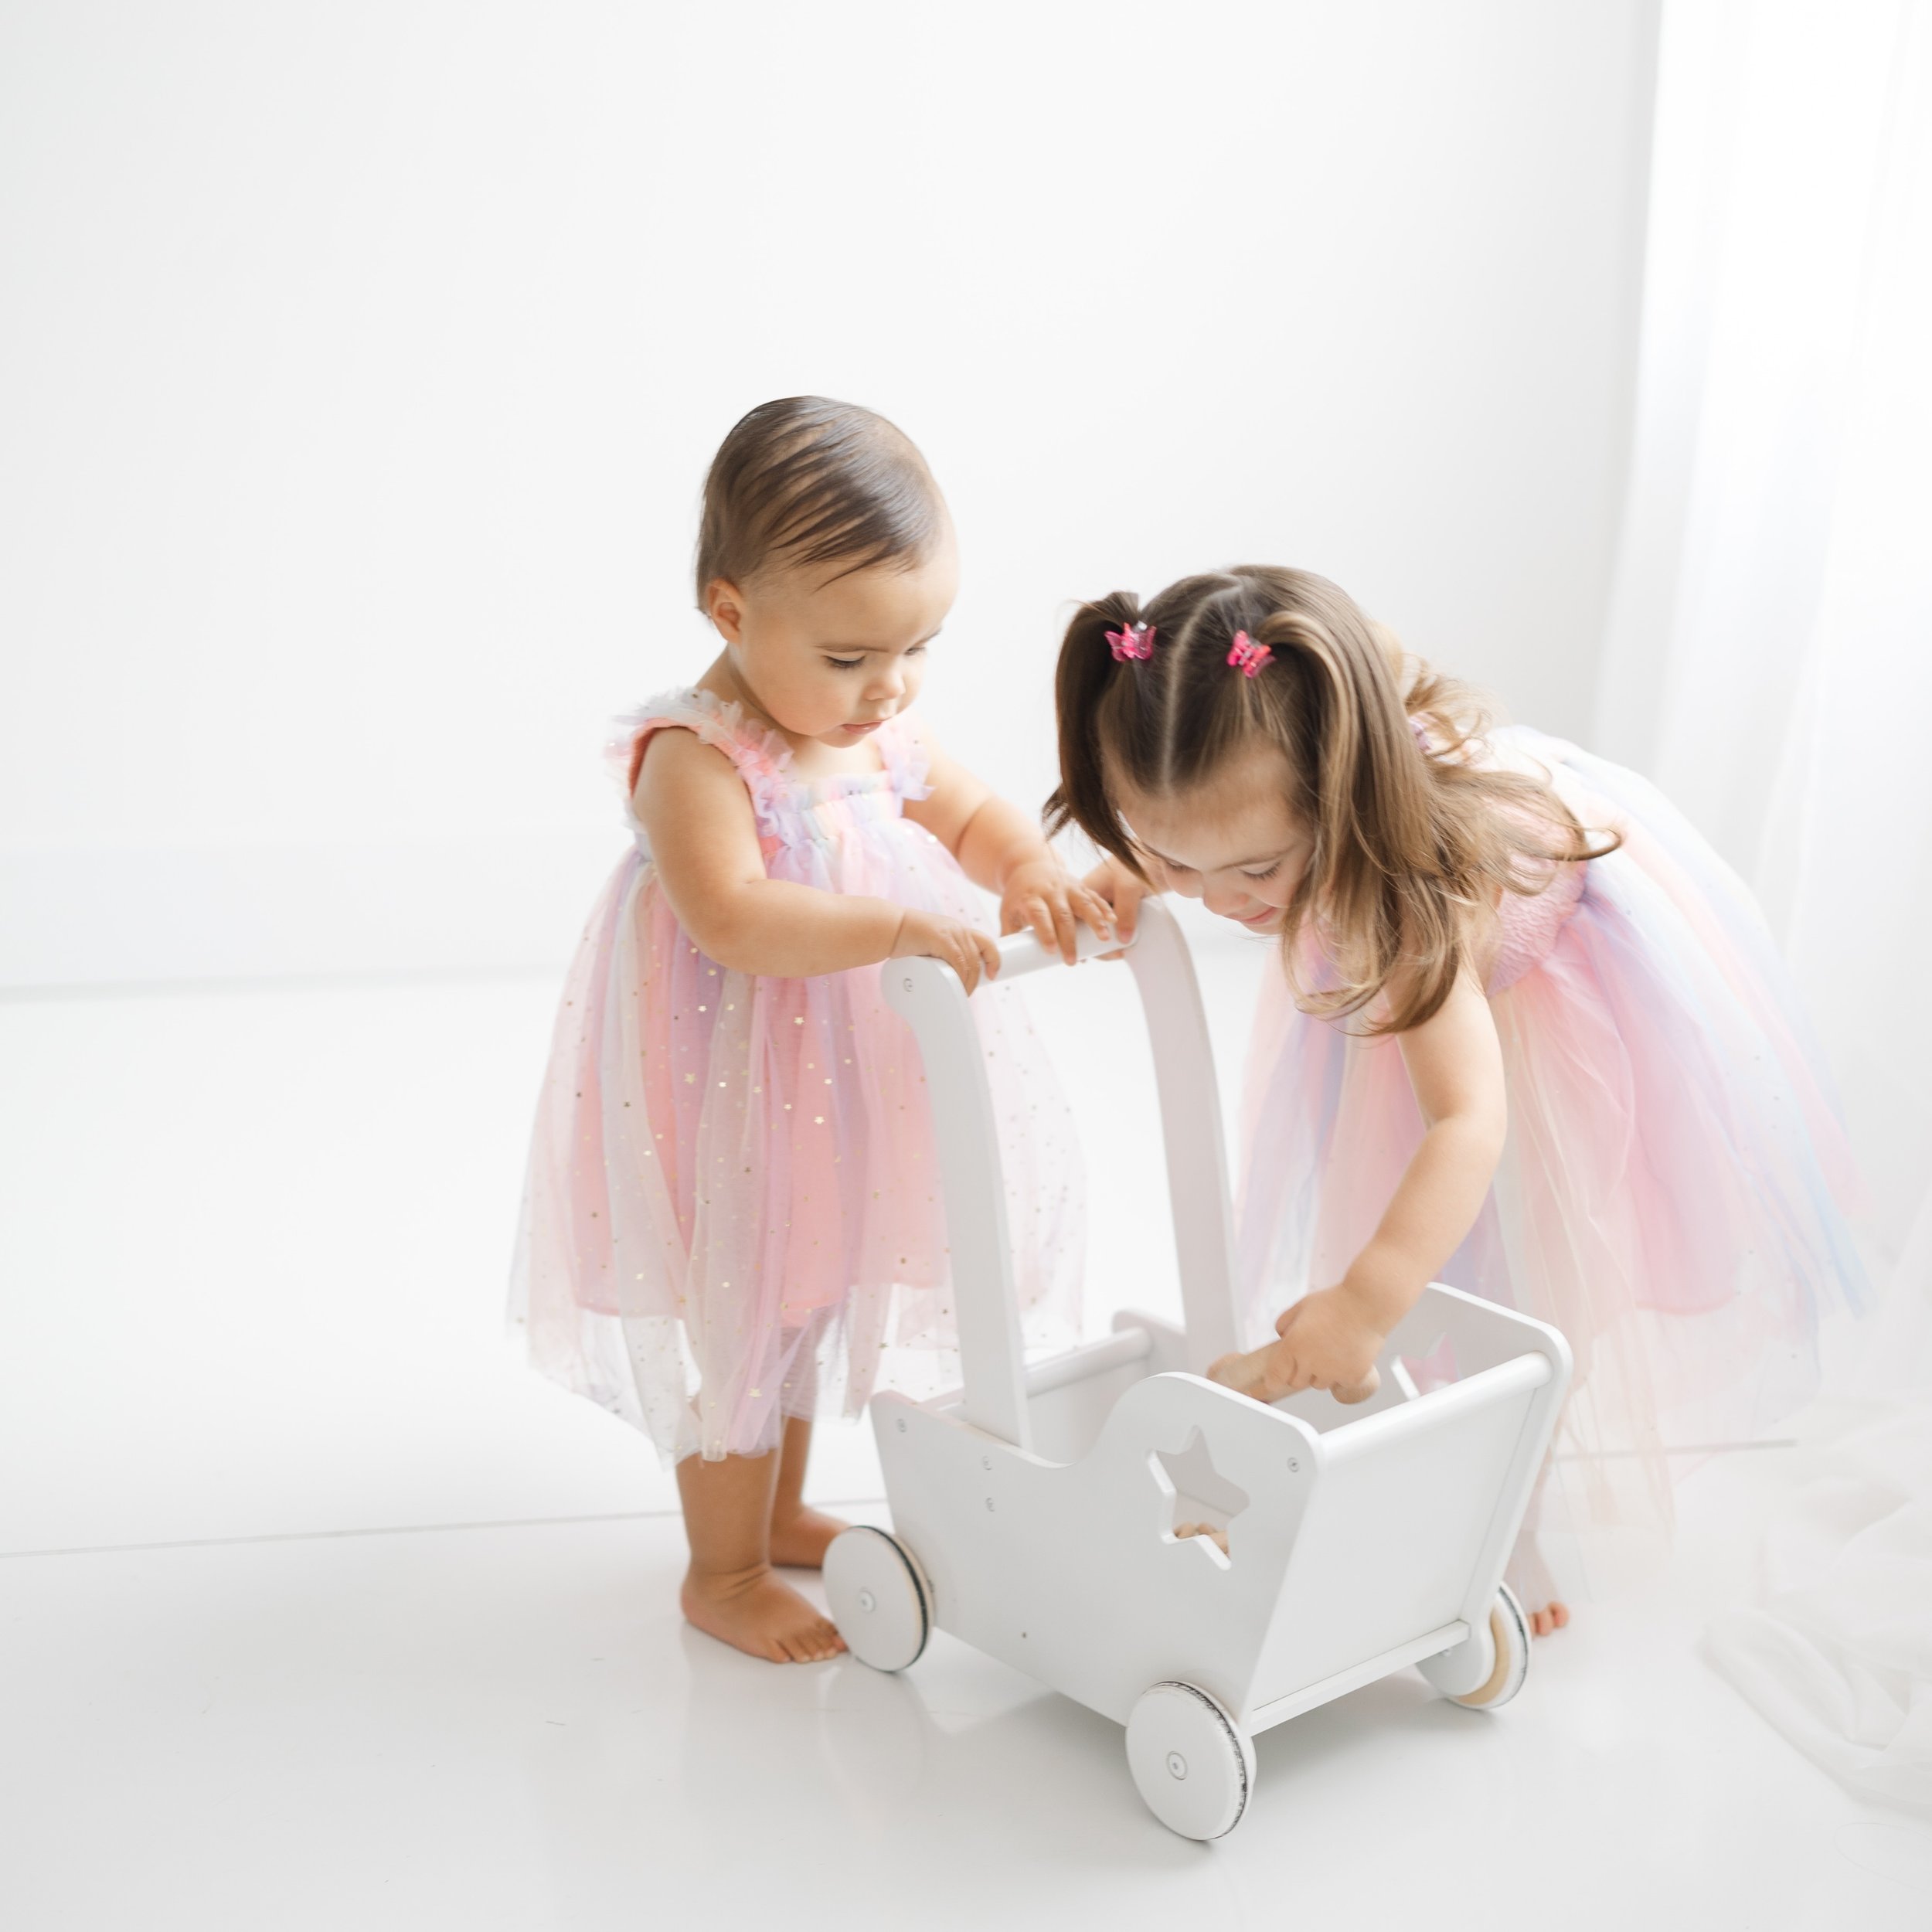 Milestone photos don&rsquo;t always have to be heirloom style. They are intended to capture the season of life your precious littles are currently in. Even if that&rsquo;s rainbow dresses and butterfly clips. 

Think about looking back on these photo